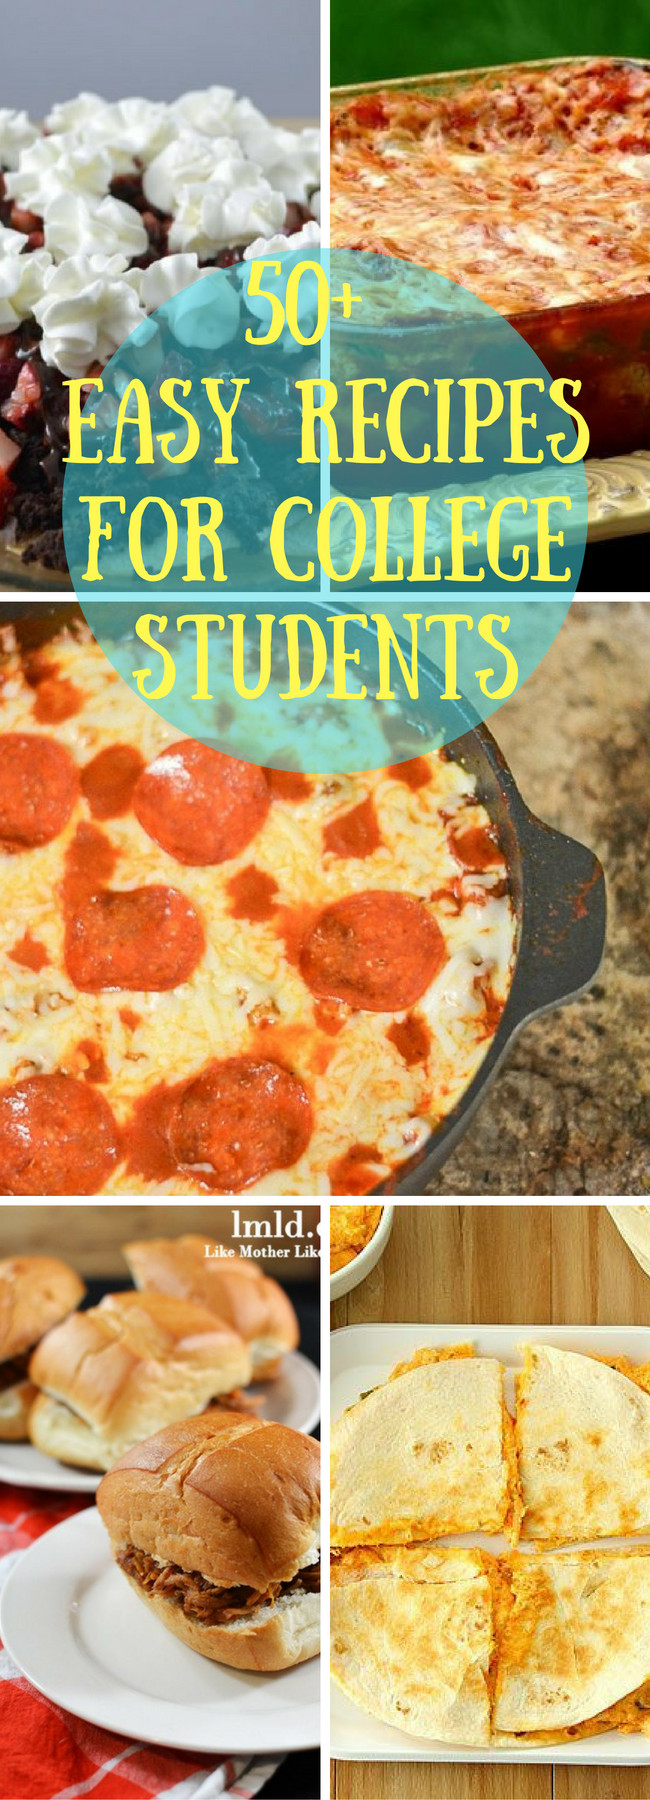 College Kids Recipes
 50 Easy Recipes for College Students